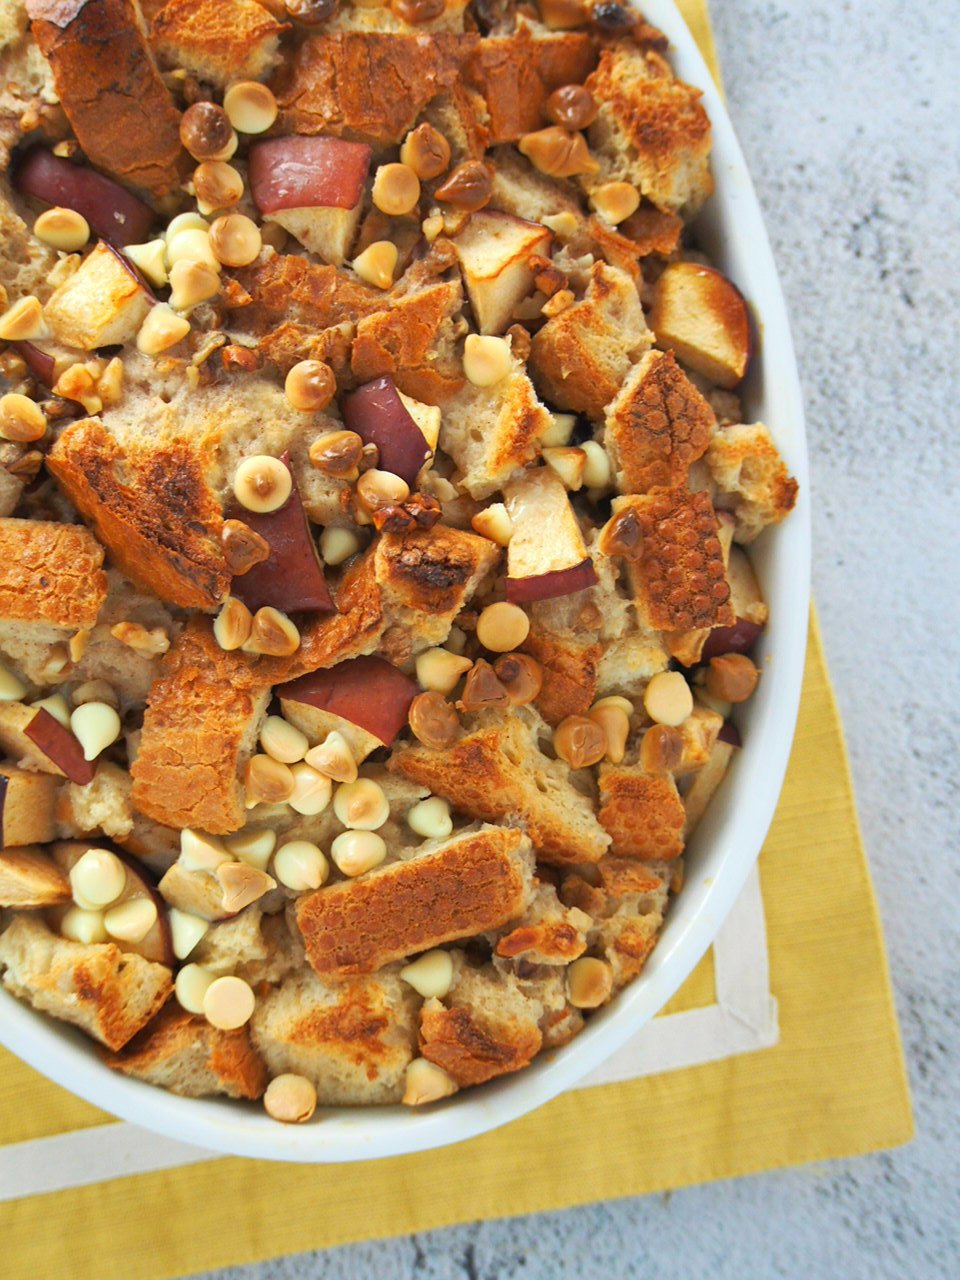 Really delicious cinnamon apple bread pudding is a dessert that will warm up and sweeten your day. Apples, nuts, cinnamon and chocolate chips, this is a comforting treat! #apples #cinnamon #breadpudding | Woman Scribbles